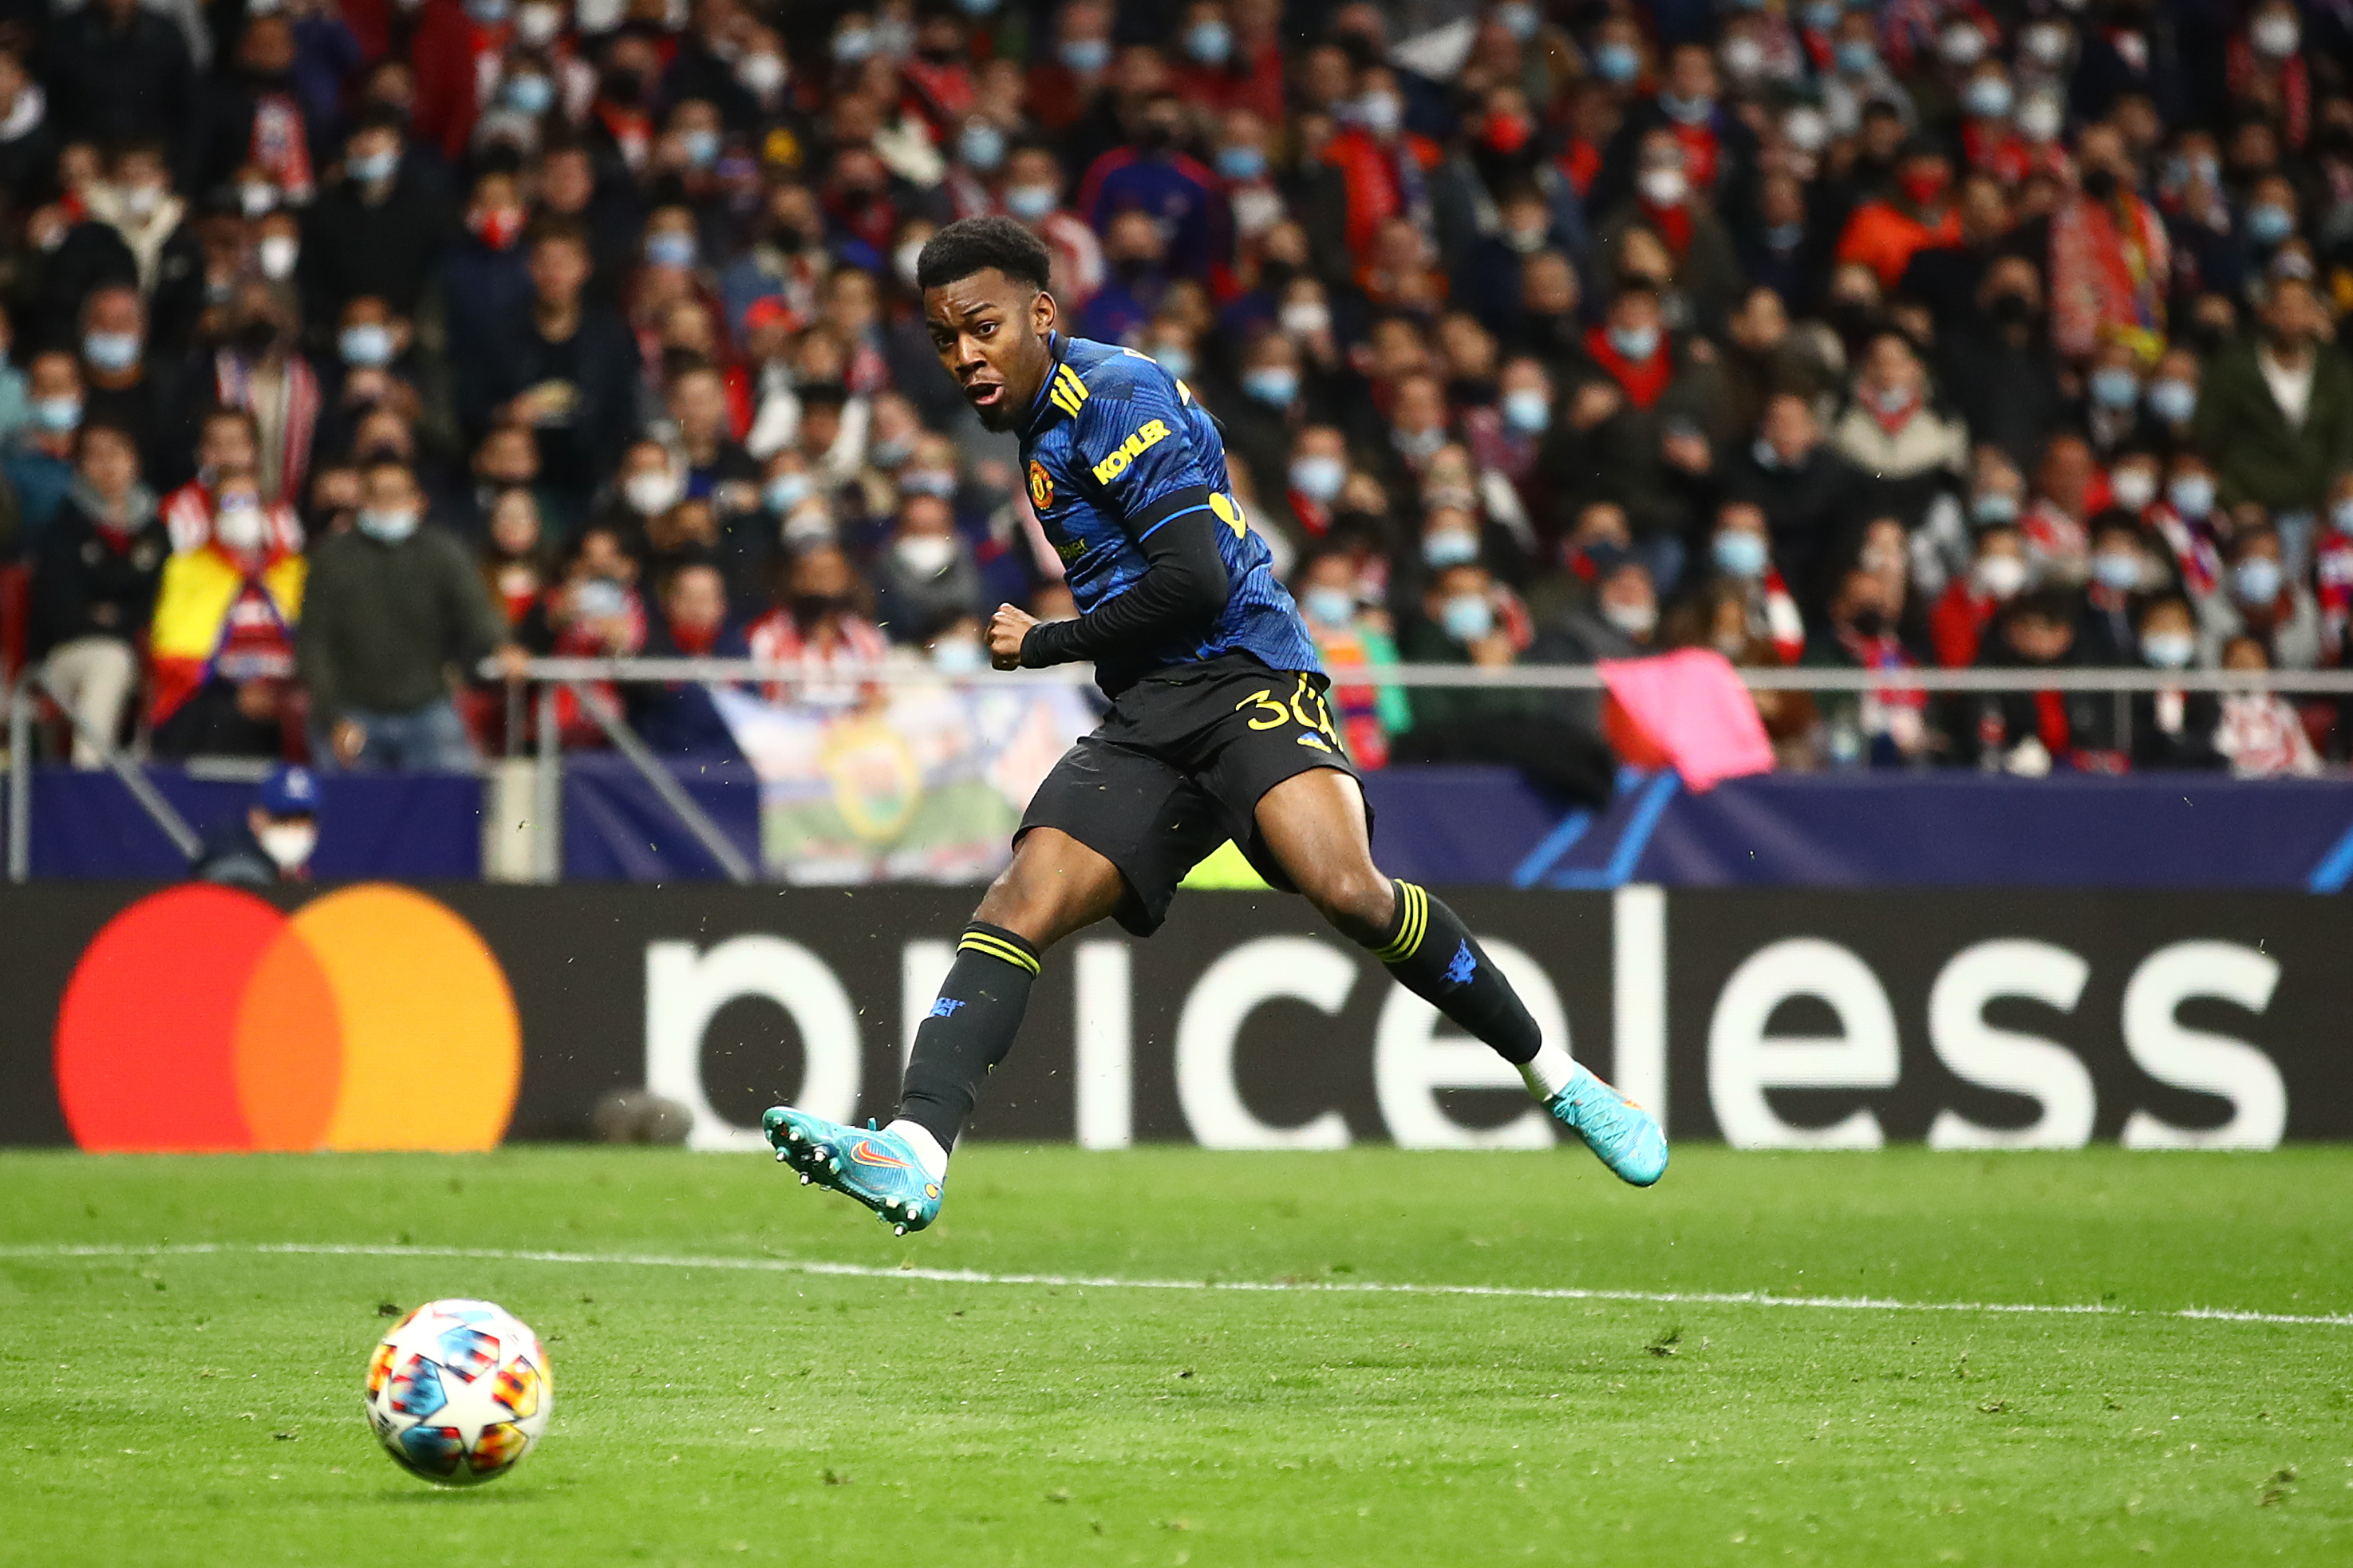 Atletico Madrid 1-1 Manchester United LIVE: 19-year-old Anthony Elanga scores the equaliser for Man United as the Round of 16 tie will be decided at Old Trafford